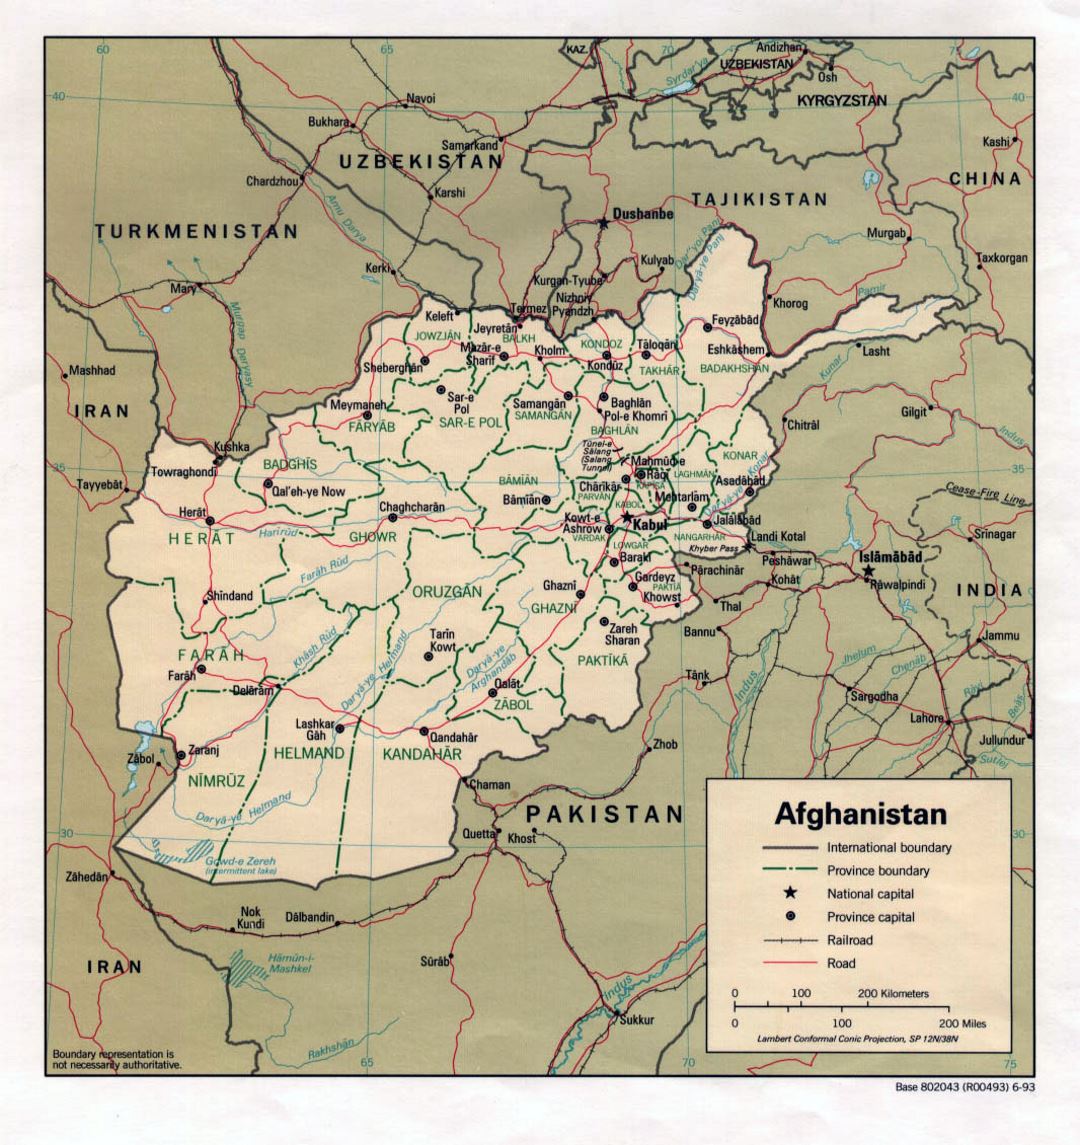 Detailed political and administrative map of Afghanistan with major cities and roads - 1993